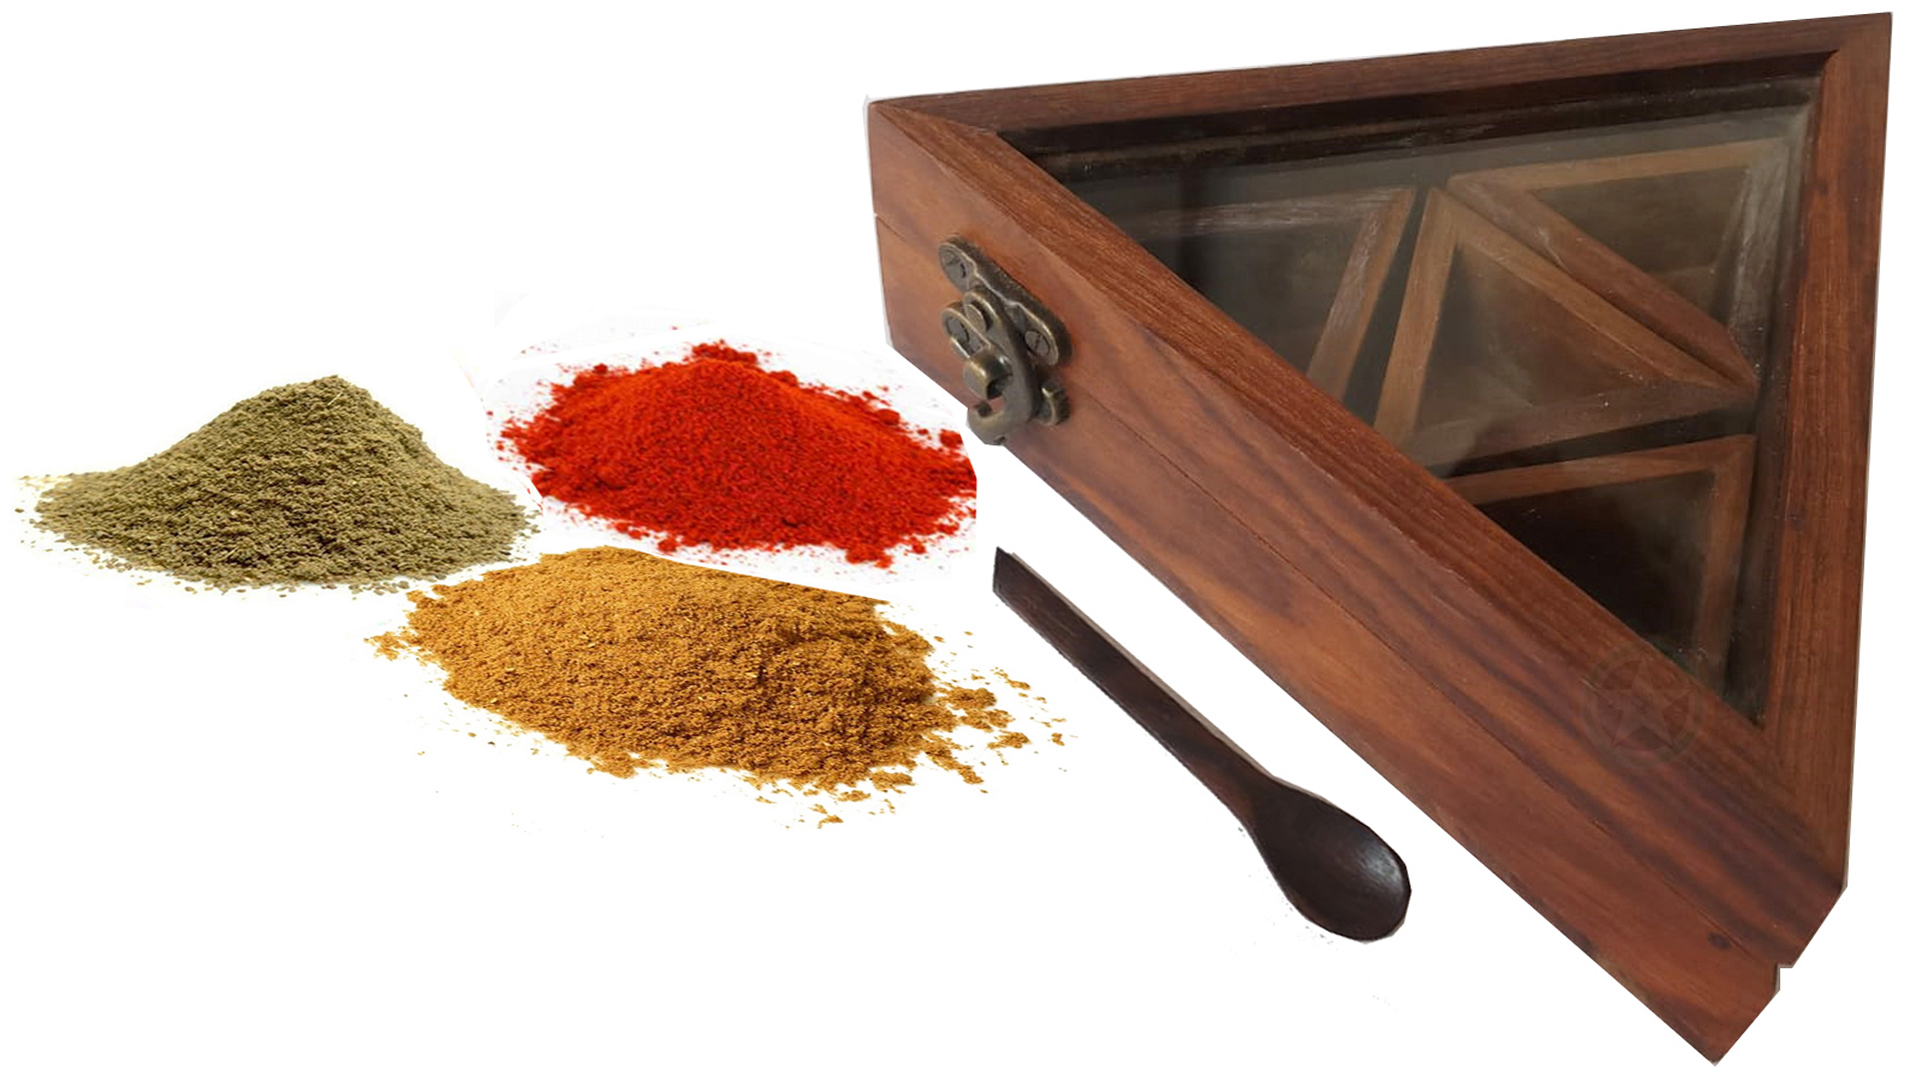 WORLD STAR INDIA Wooden Spice Box | Masala Dabba | Masala Storage with 1 spoon- (4- Containers) Home - Kitchen Decorative (Triangle Shape) Masala Dabba, Looking is Beautiful Antique Gift Item Birthday Gift for Mom from World Star India